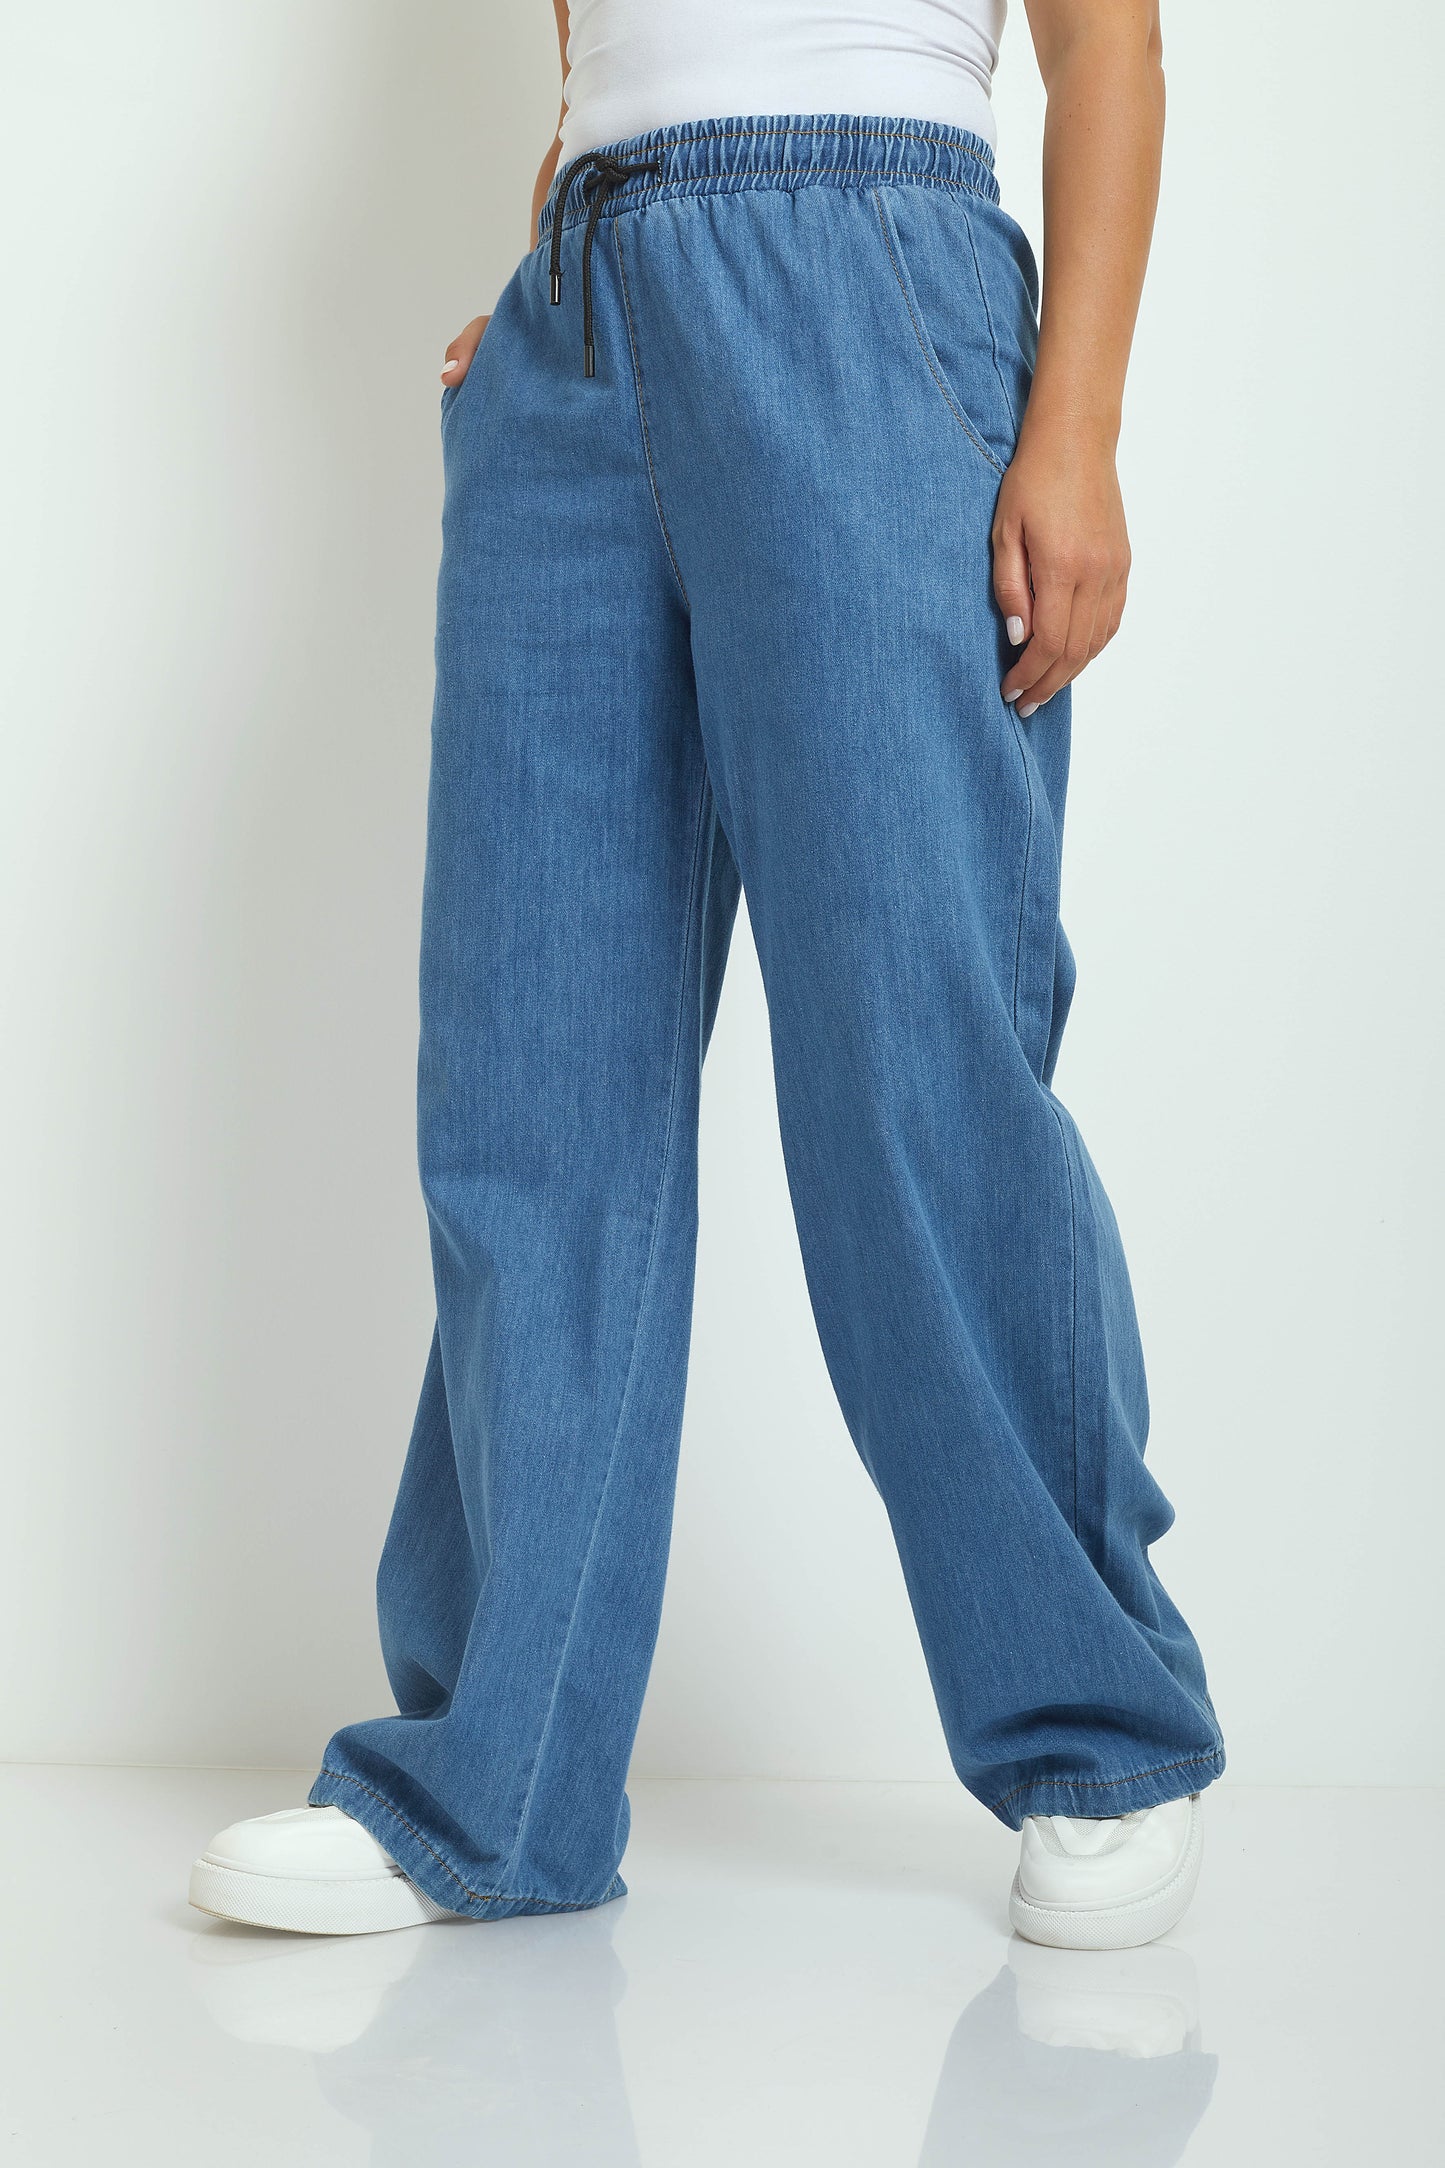 Jeans - Wide-Leg ( WITH TIES )